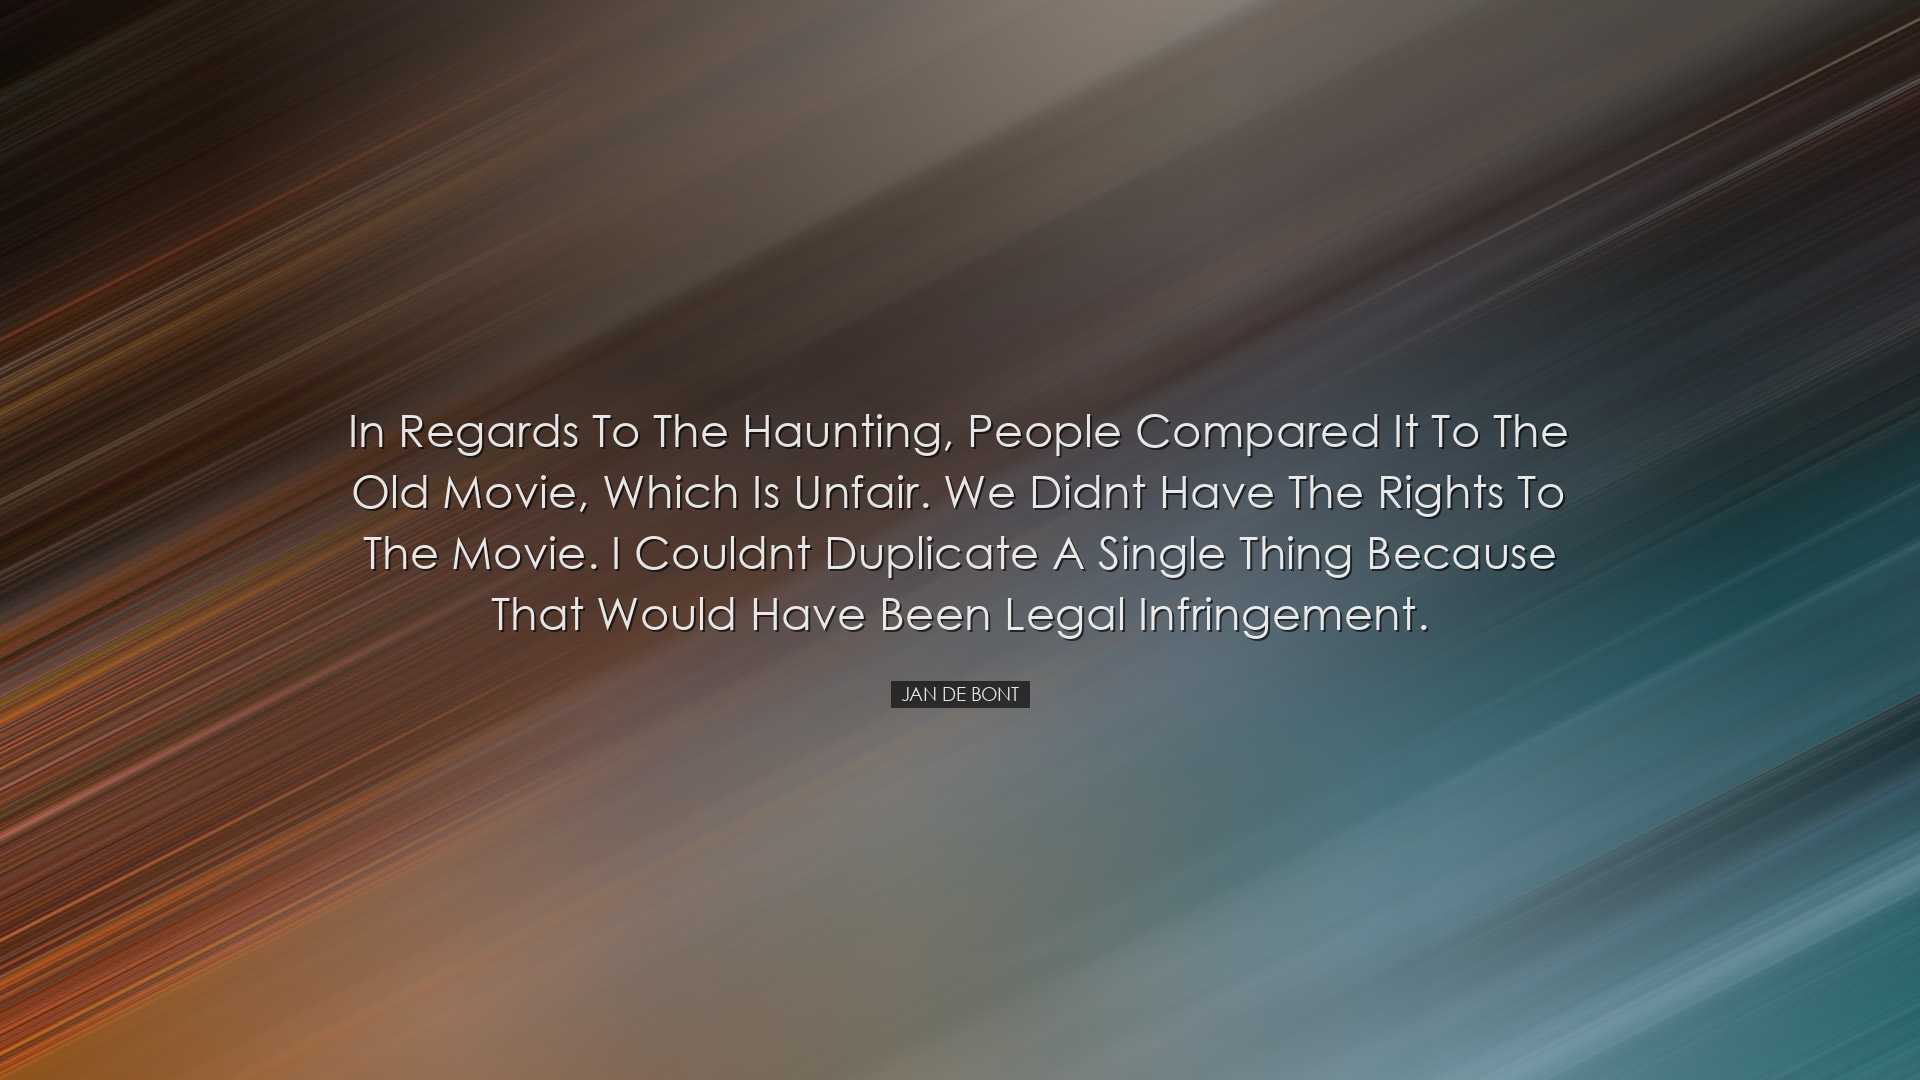 In regards to The Haunting, people compared it to the old movie, w